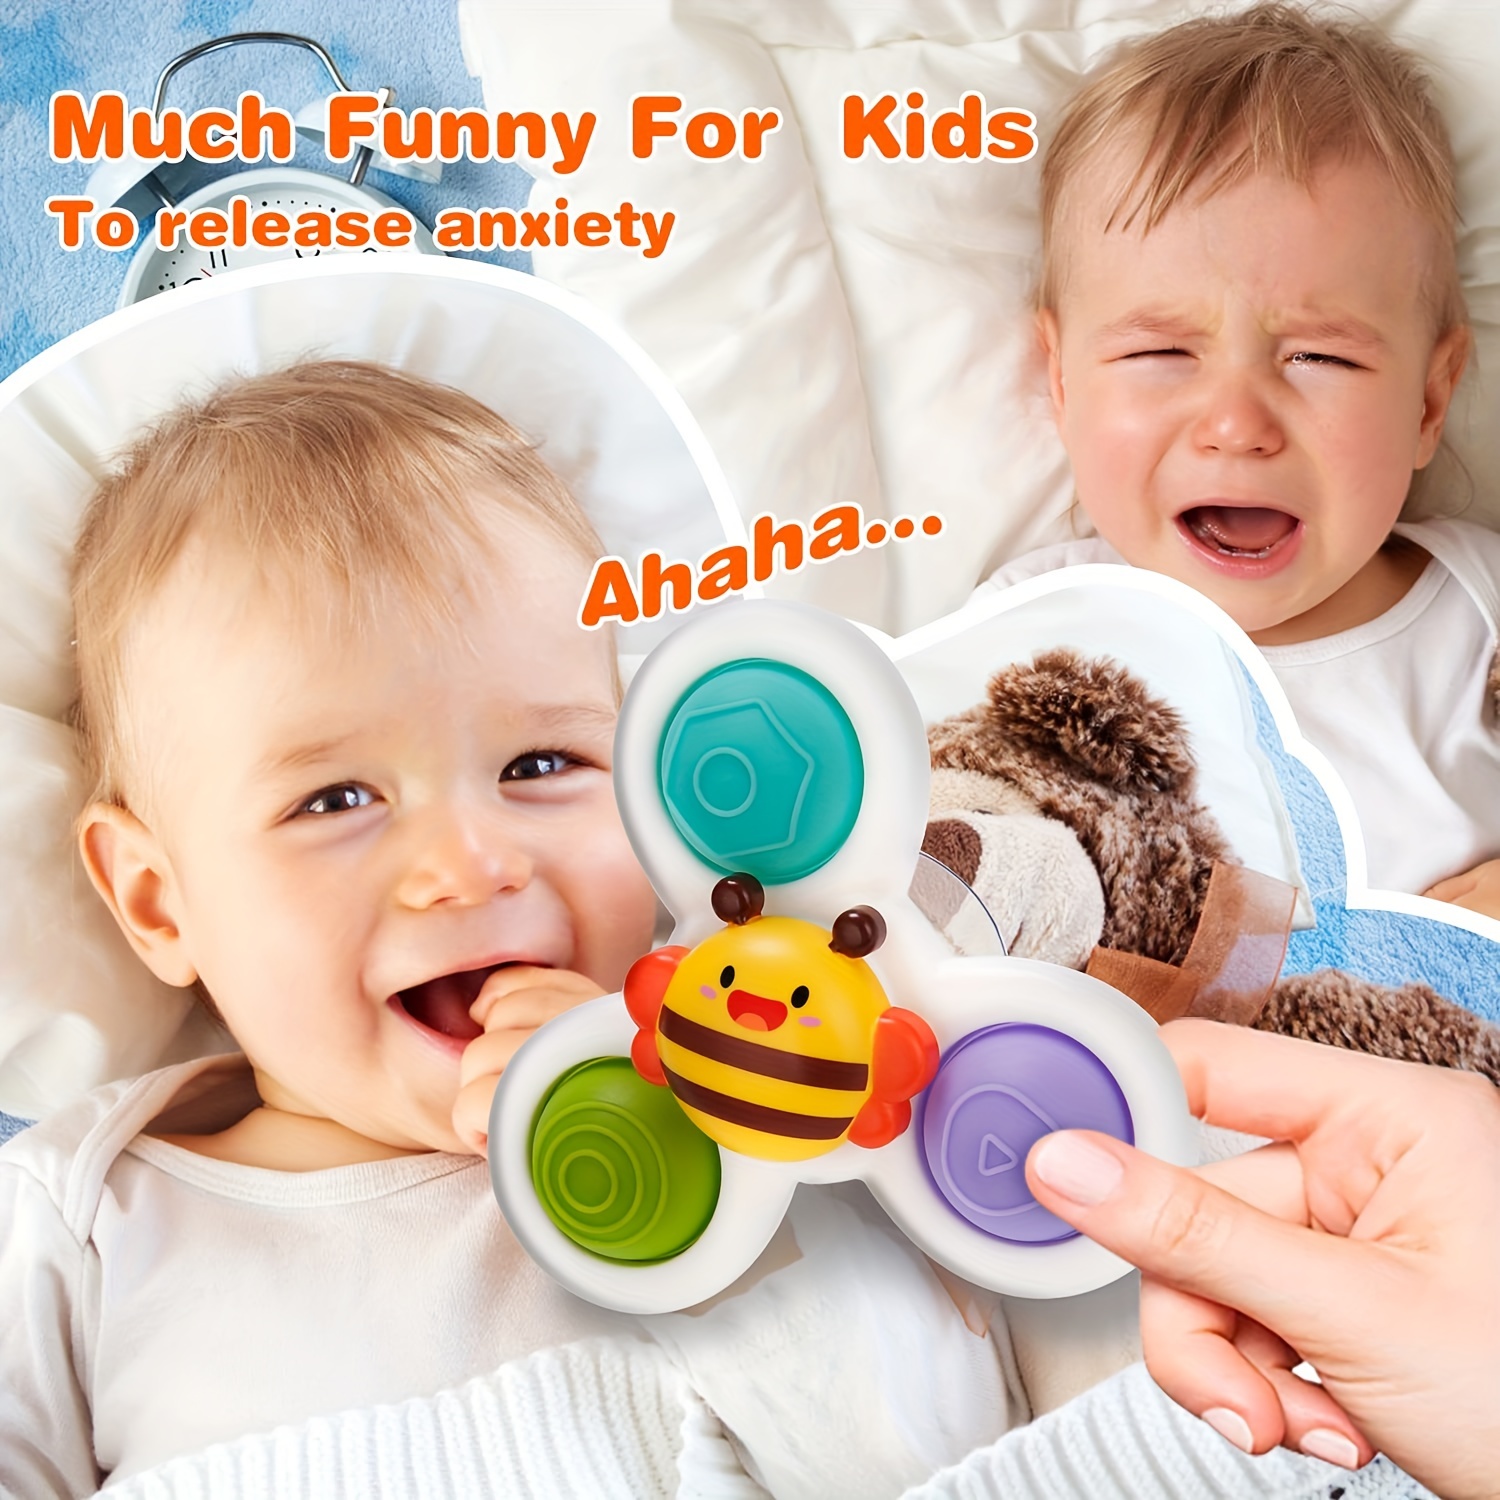  Suction Cup Spinner Toys for Baby,Baby Fidget Spinner  Suction,Window Spinner Toys for Toddlers 1-3,Sensory Bath Toys Gift for 1 2  3 Year Old : Toys & Games